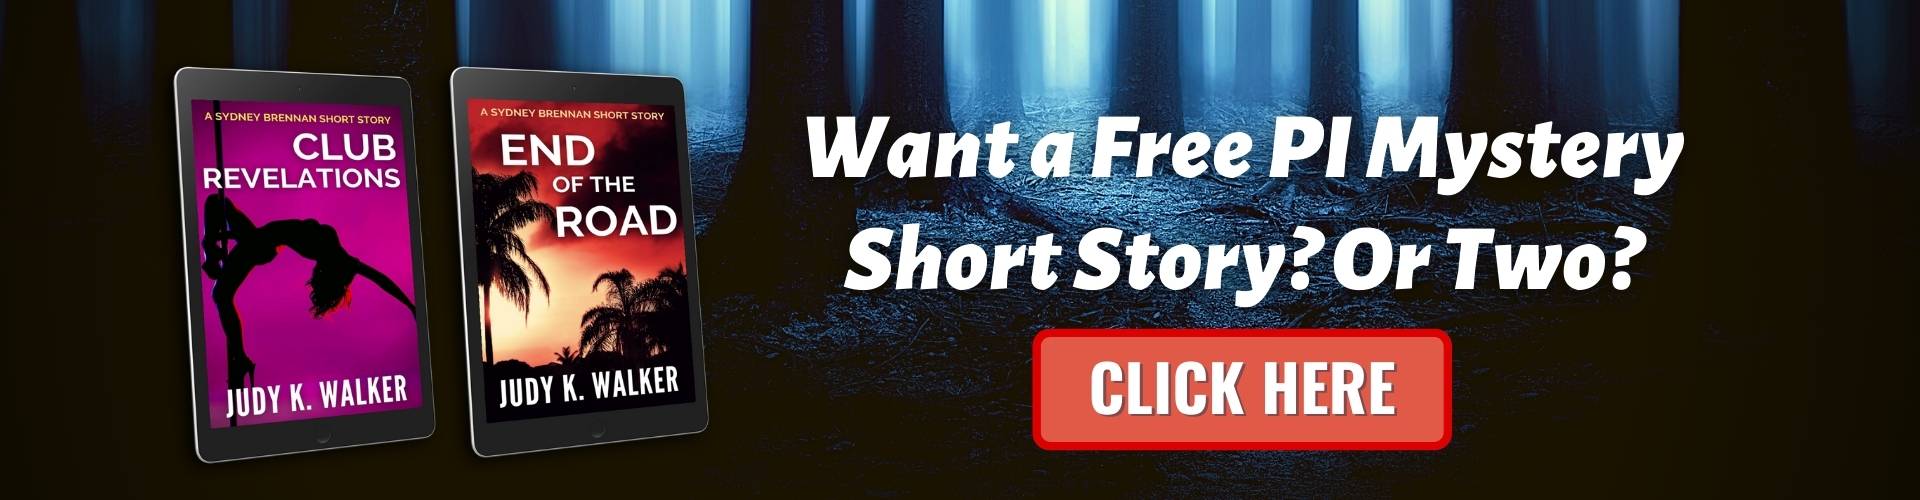 Free Stories Offer with Dark Forest Background